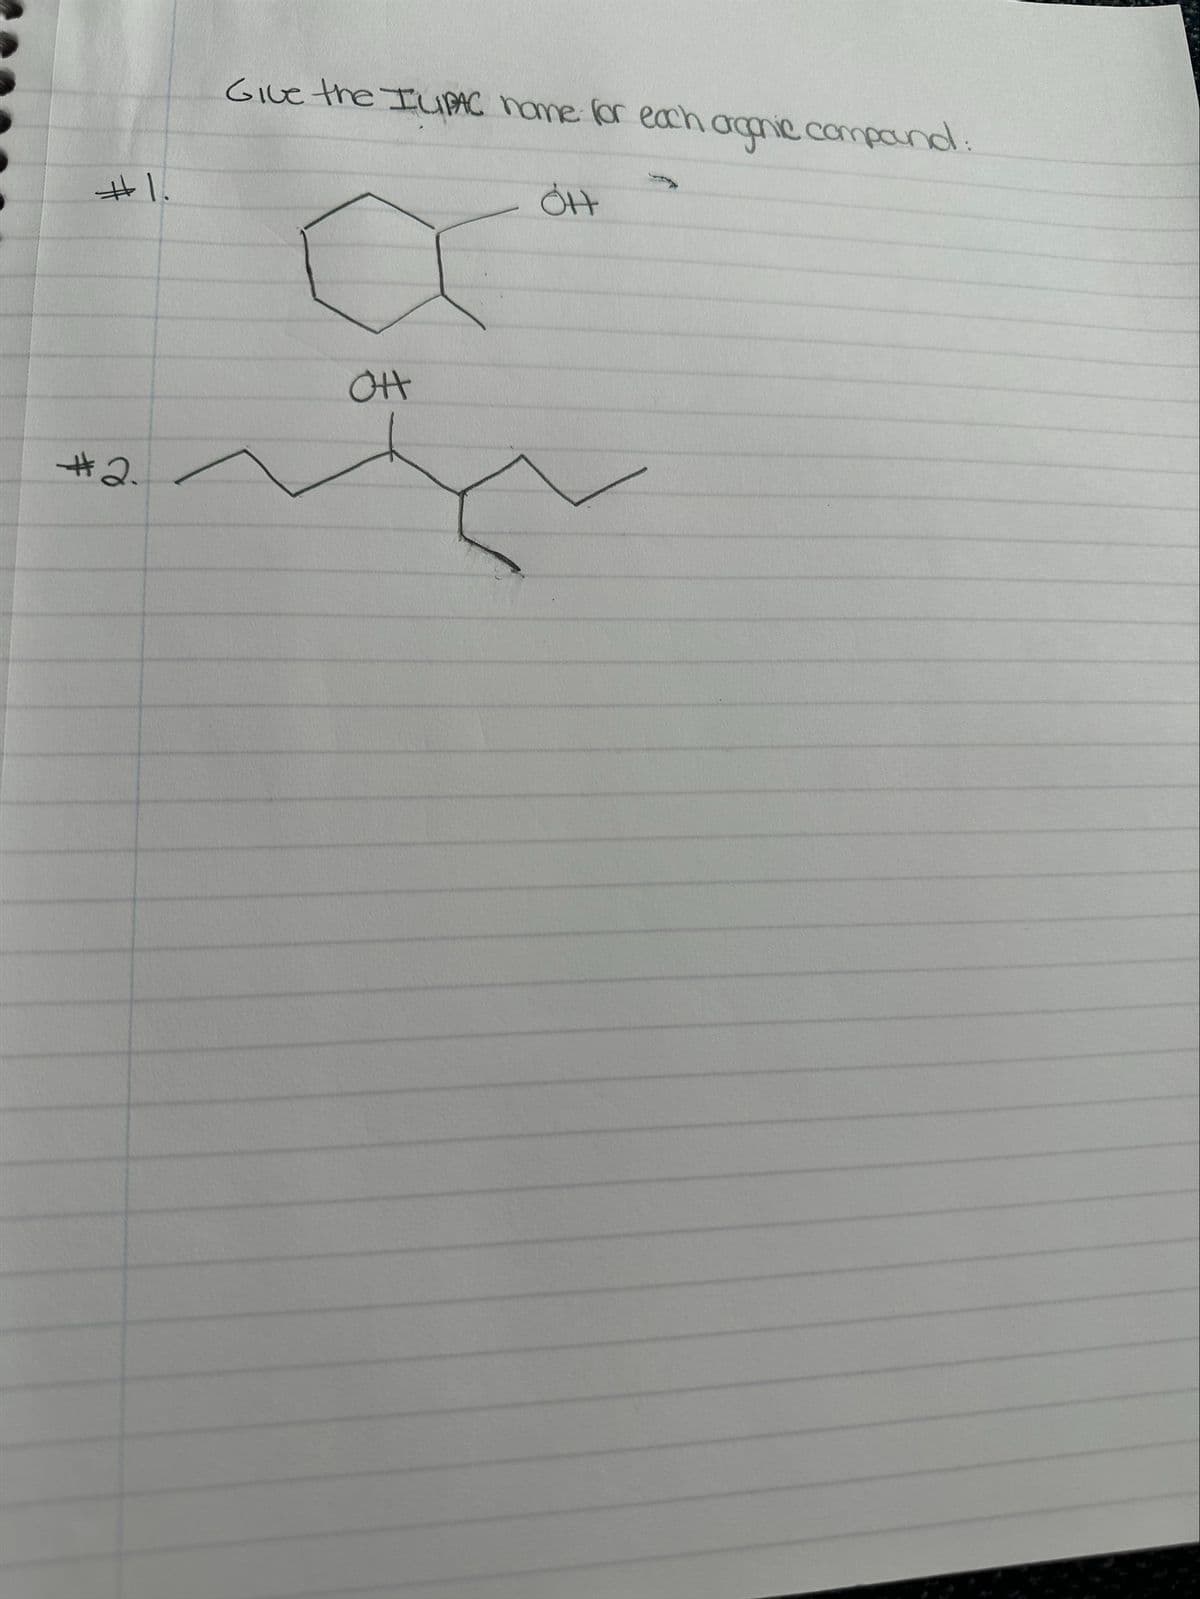 #1.
Give the IUPAC name for each organic compound:
#2.
OH
OH